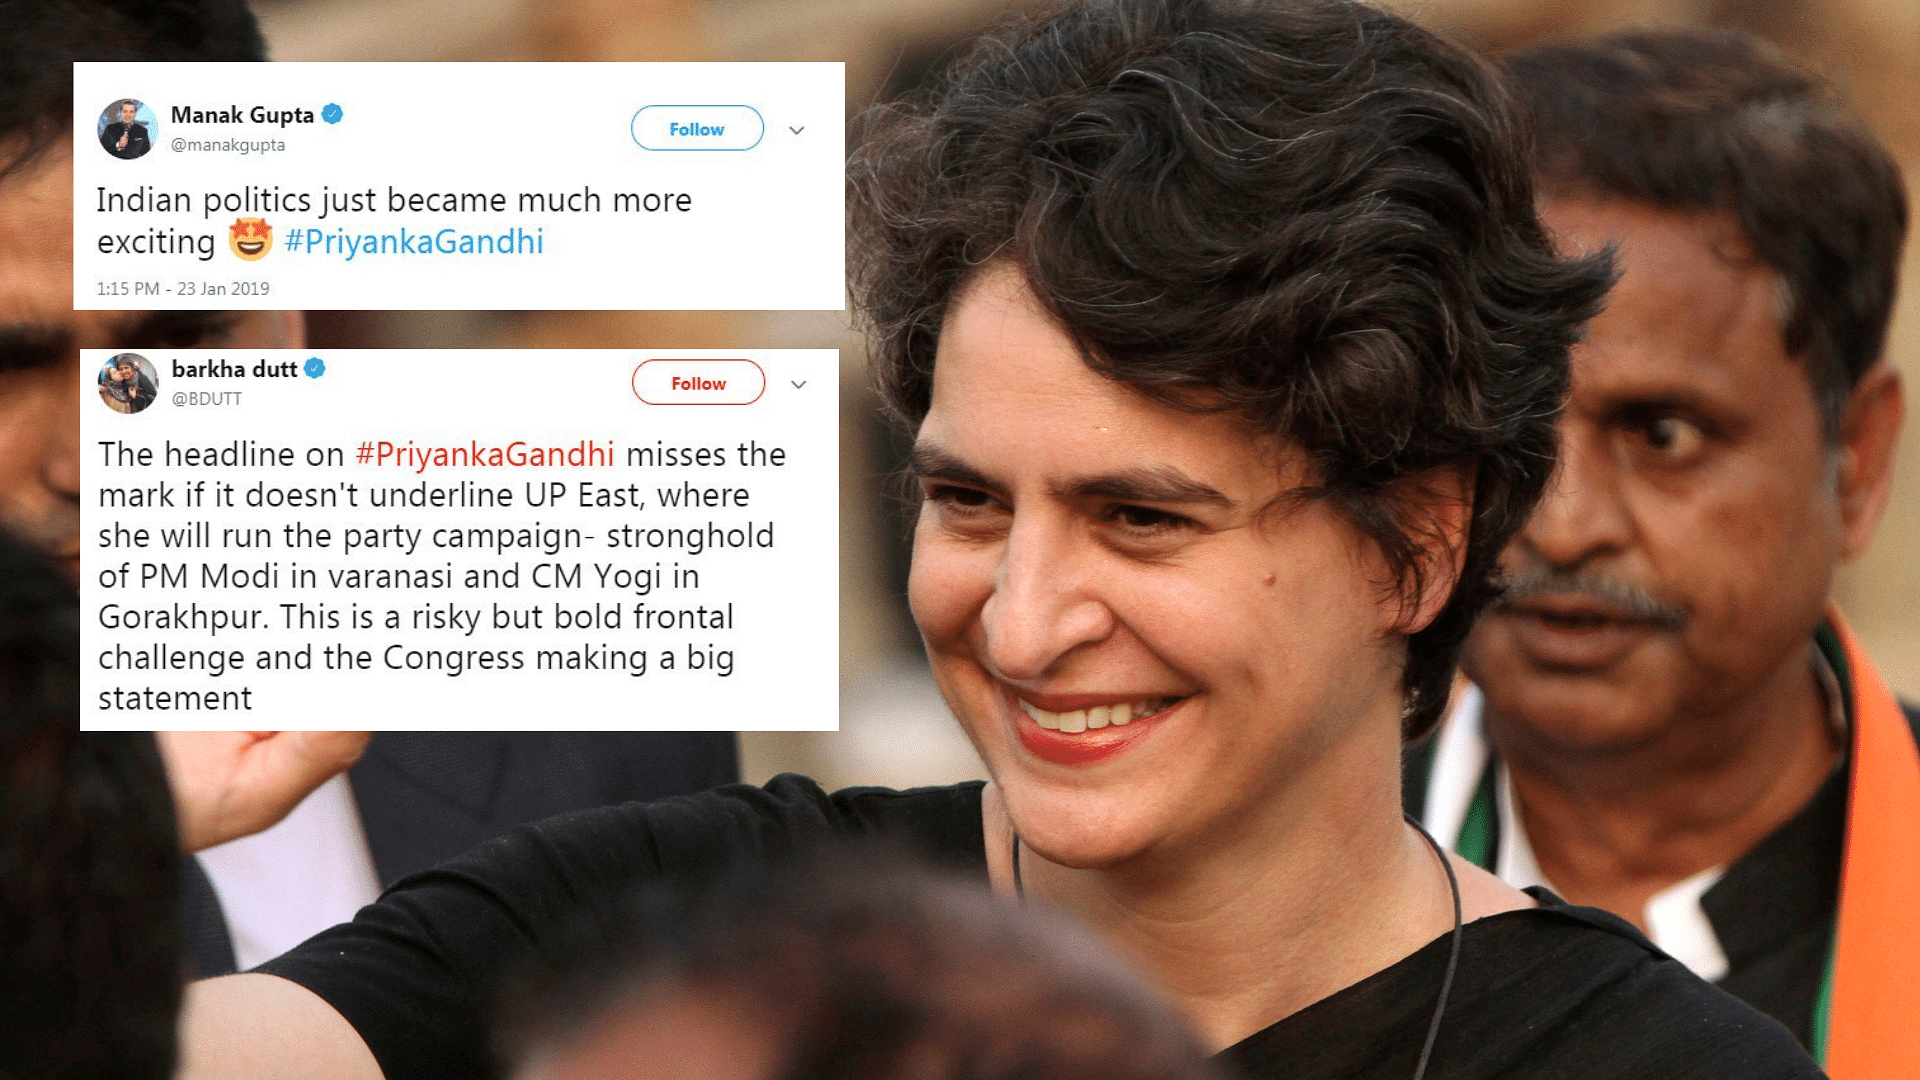 After years of speculation, Priyanka Gandhi has finally made her entry into politics. Here’s how Twitter reacted.